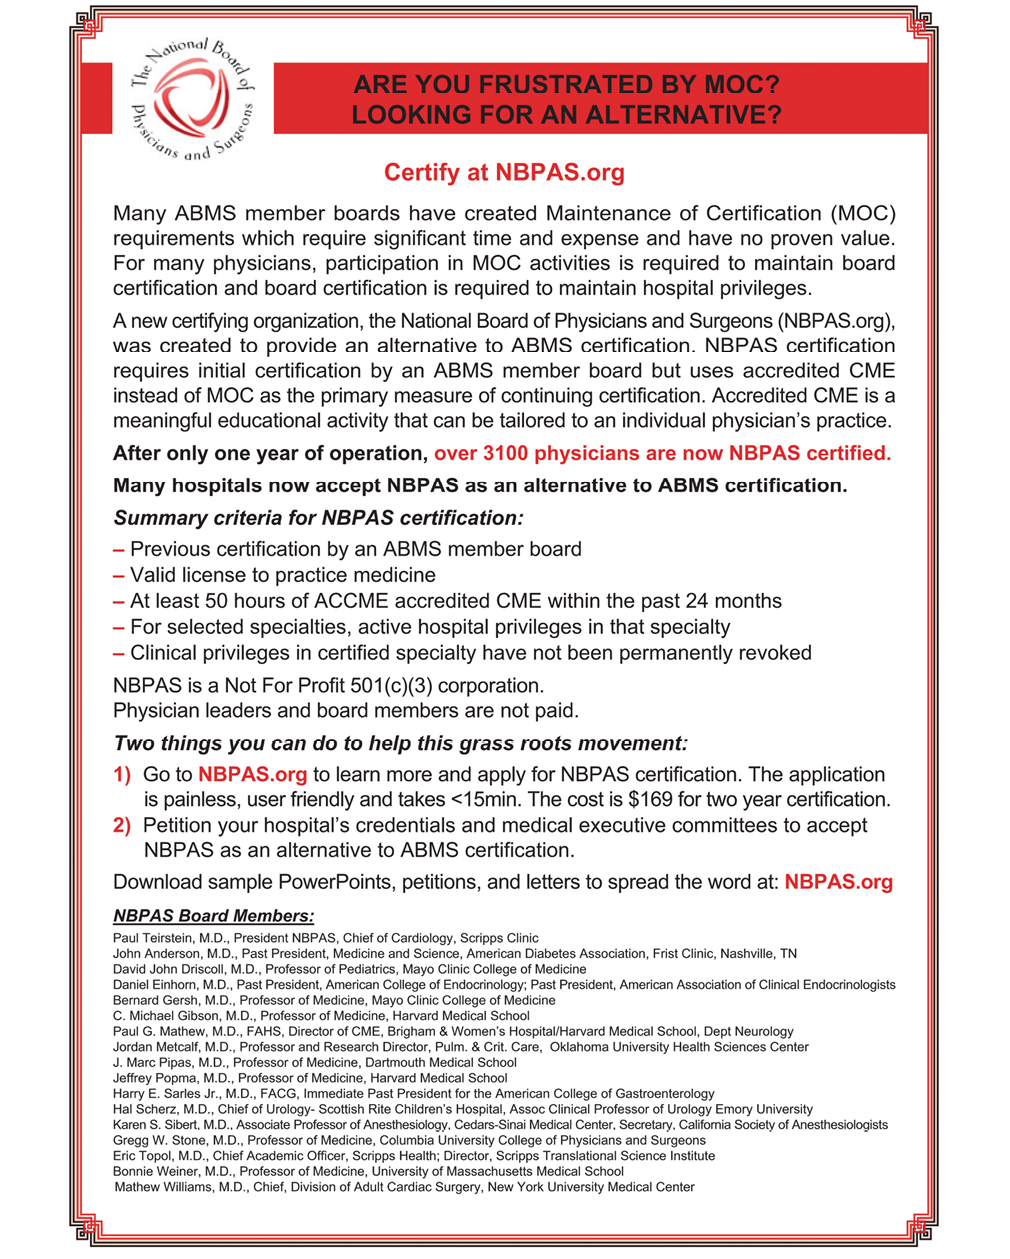 An Alternative Pathway to the ABPN Maintenance of Certification